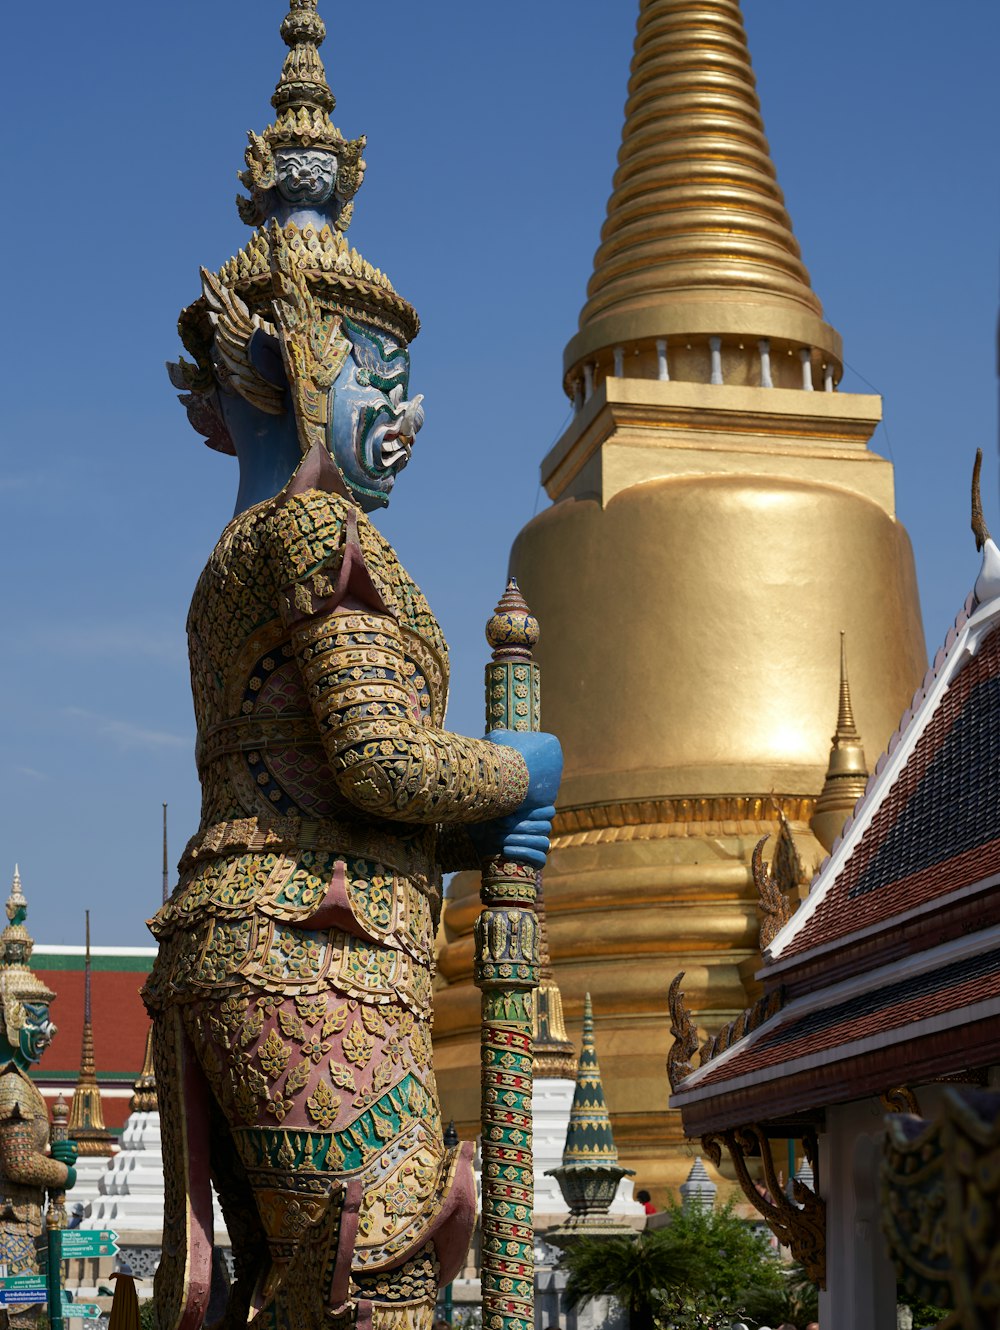 a statue of a woman holding a vase in front of a gold spire